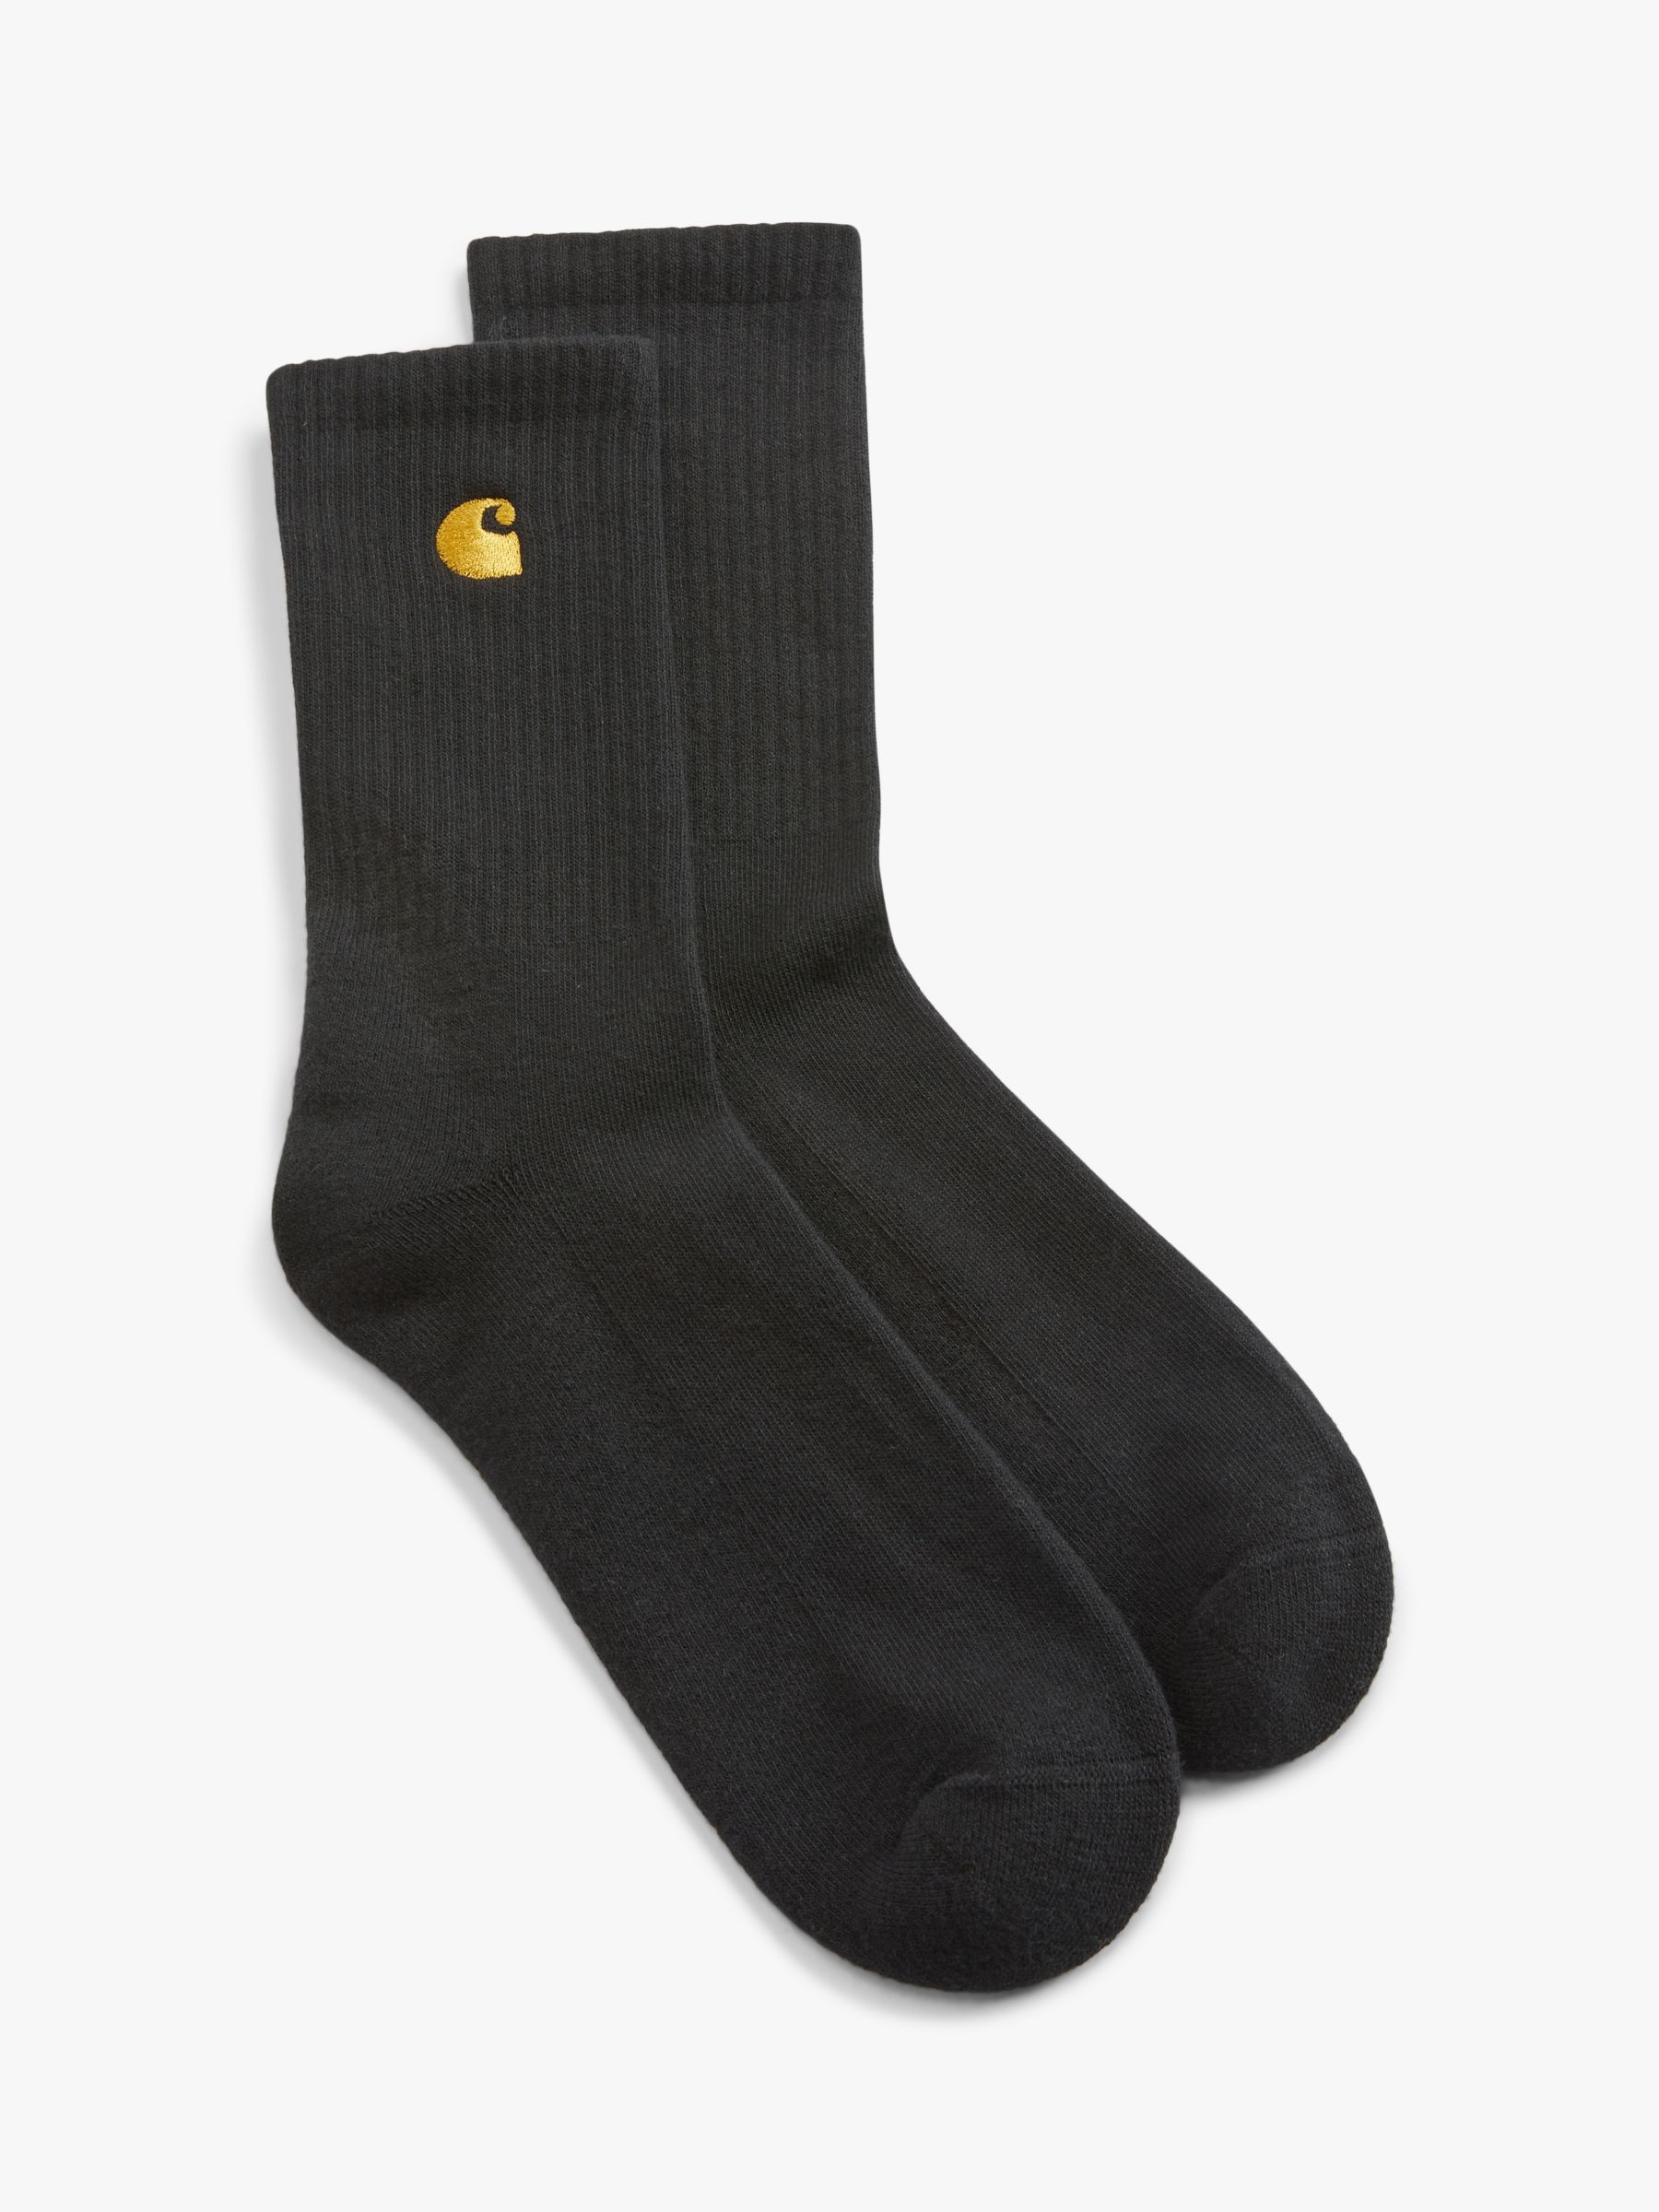 Carhartt WIP Chase Socks, One Size, Black at John Lewis & Partners